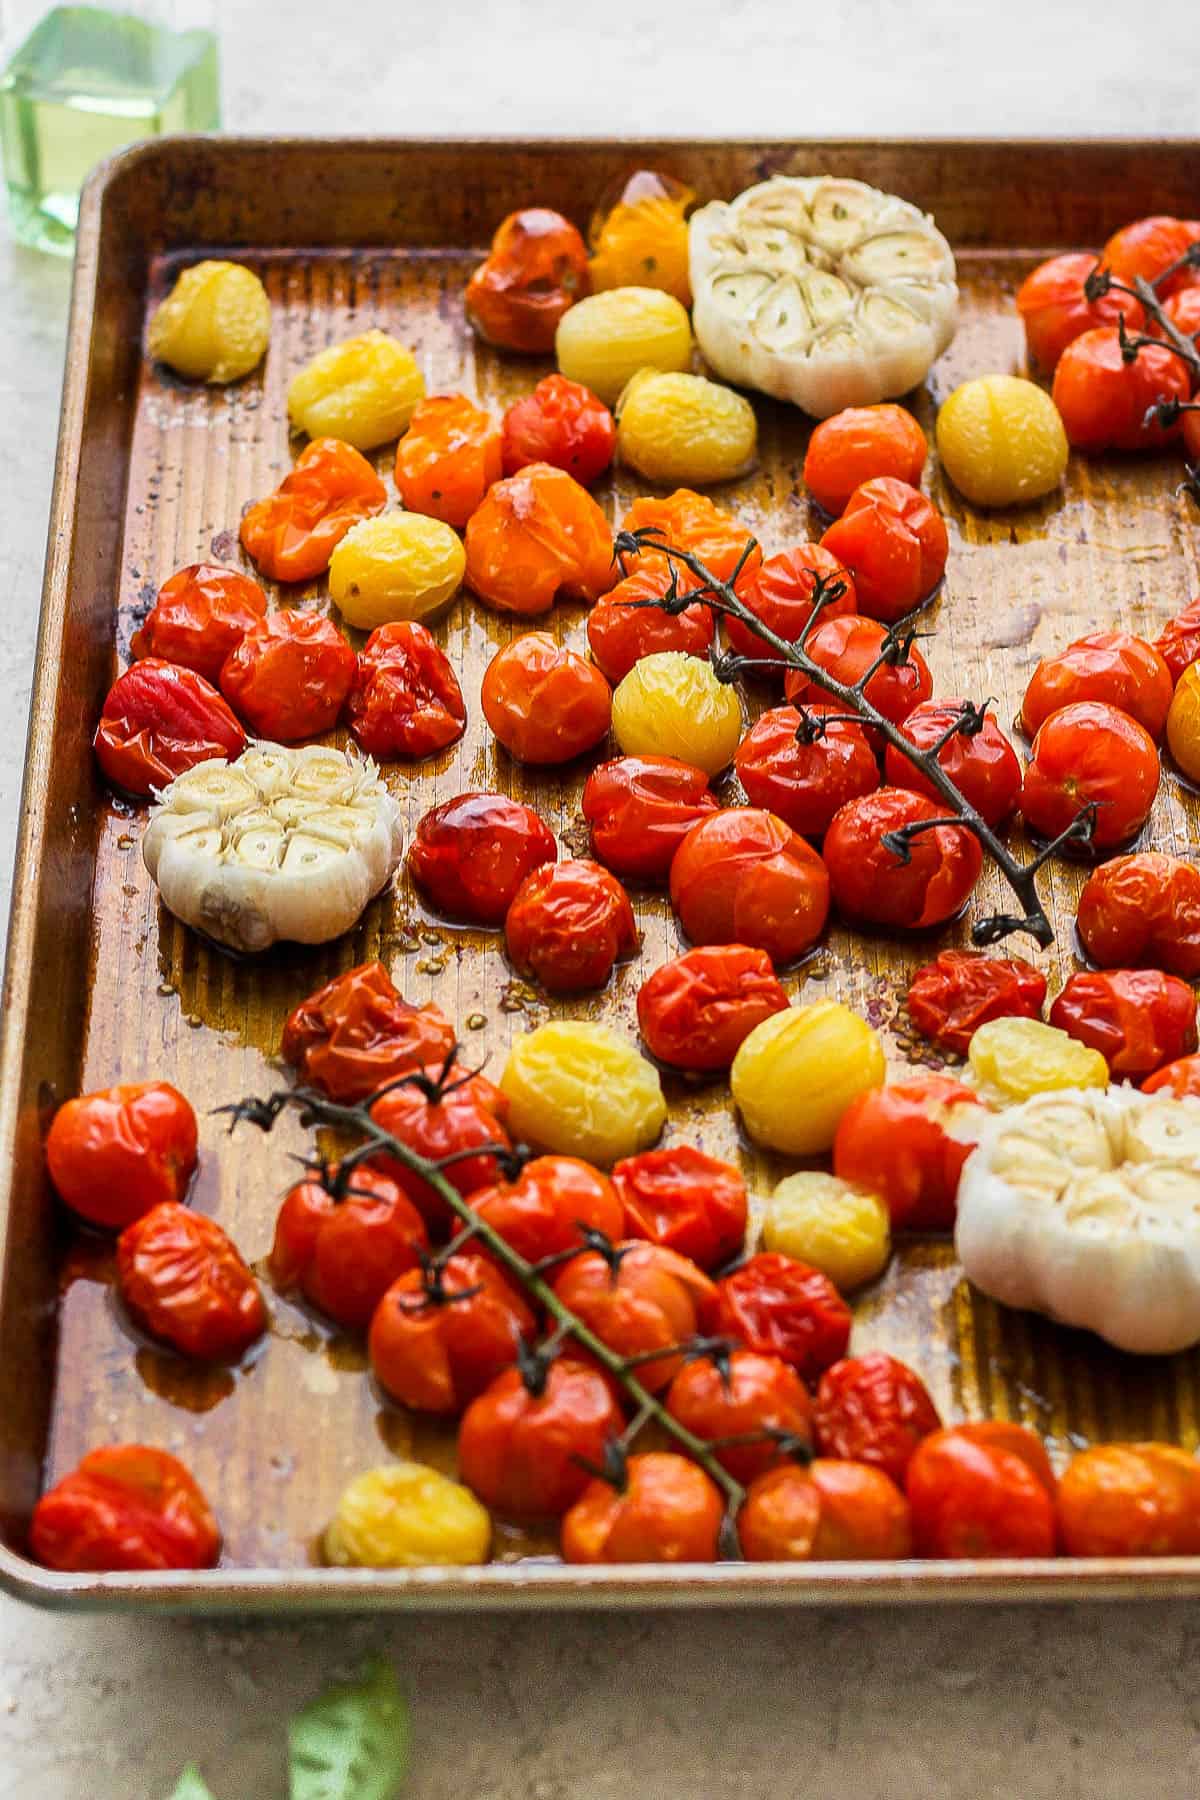 Roasted cherry tomatoes on a baking sheet.